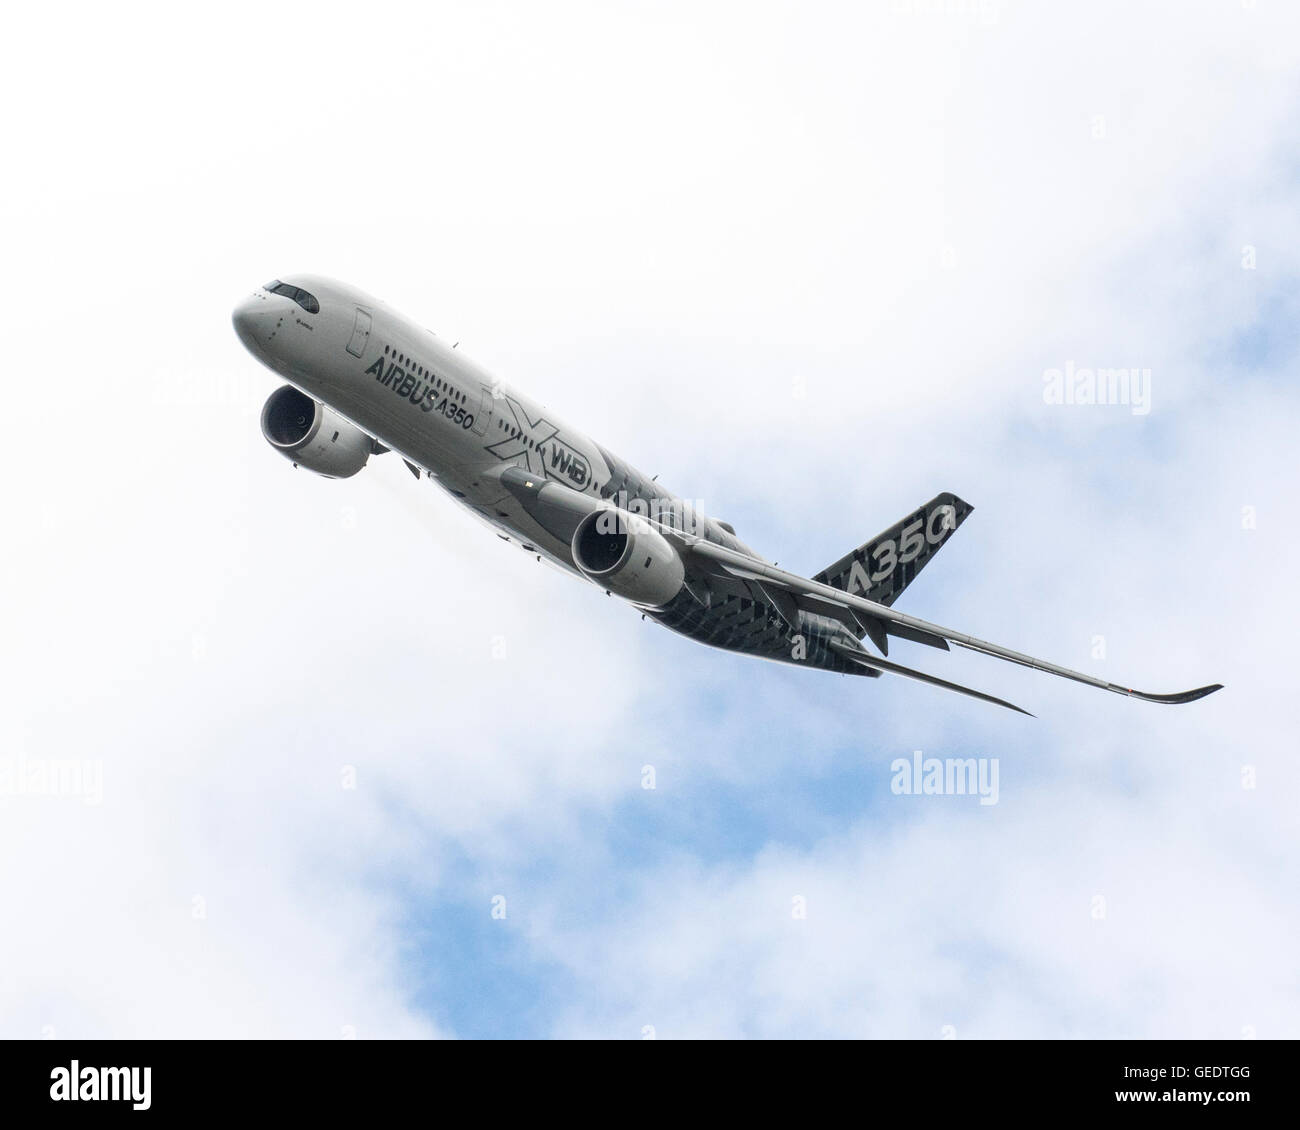 The Airbus A350 jet airliner flying at the 2016 Farnborough International Airshow Stock Photo